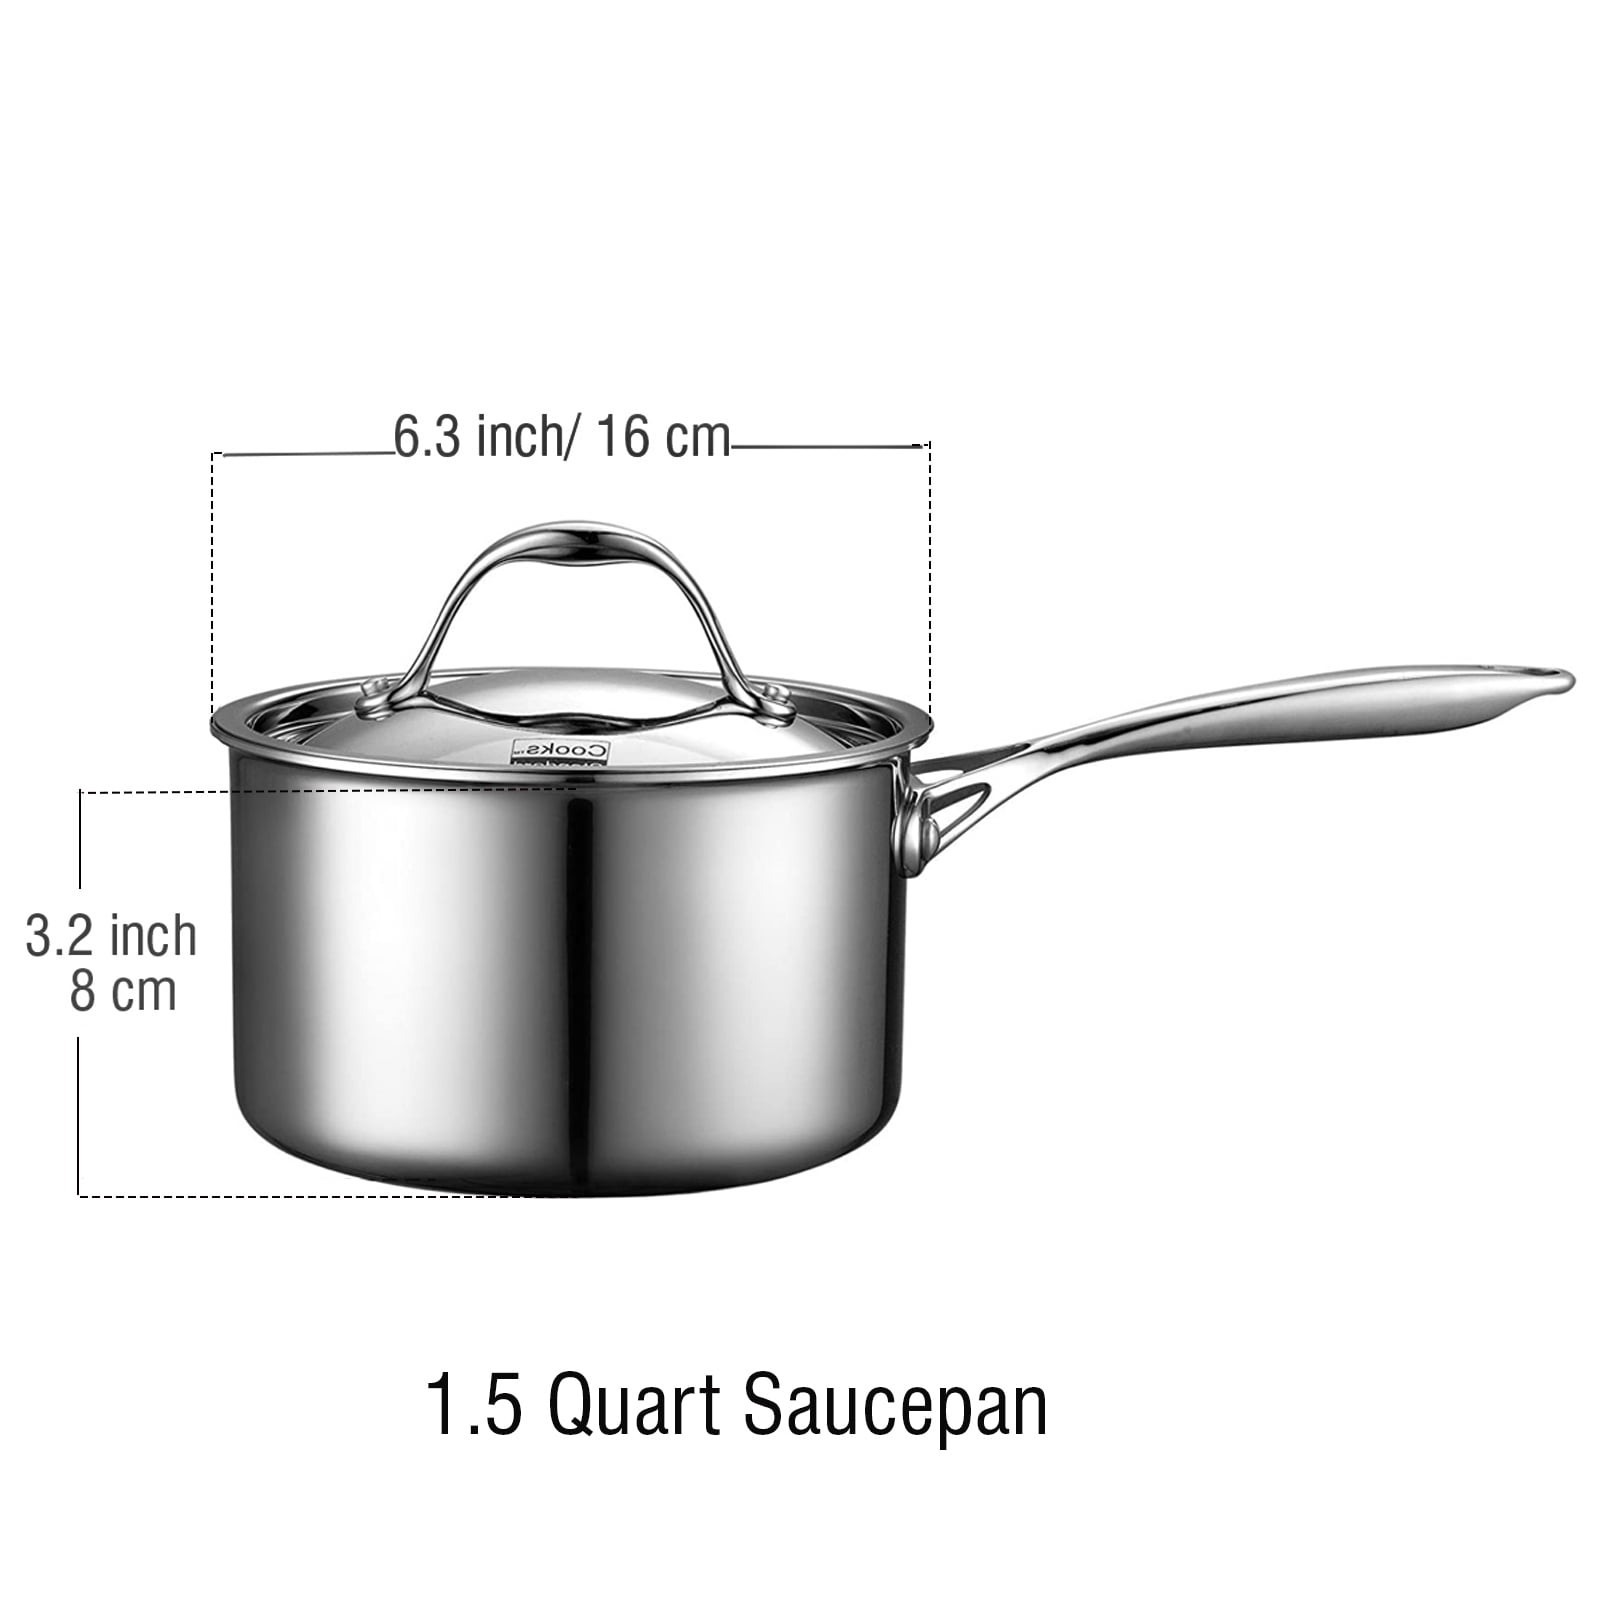 DELUXE Sauce Pan with Lid, 3 Quart 3-Ply Stainless Steel Saucepan with  Stay-Cool Handle, Multipurpose Cooking Pot for Sauces Pasta,Suitable